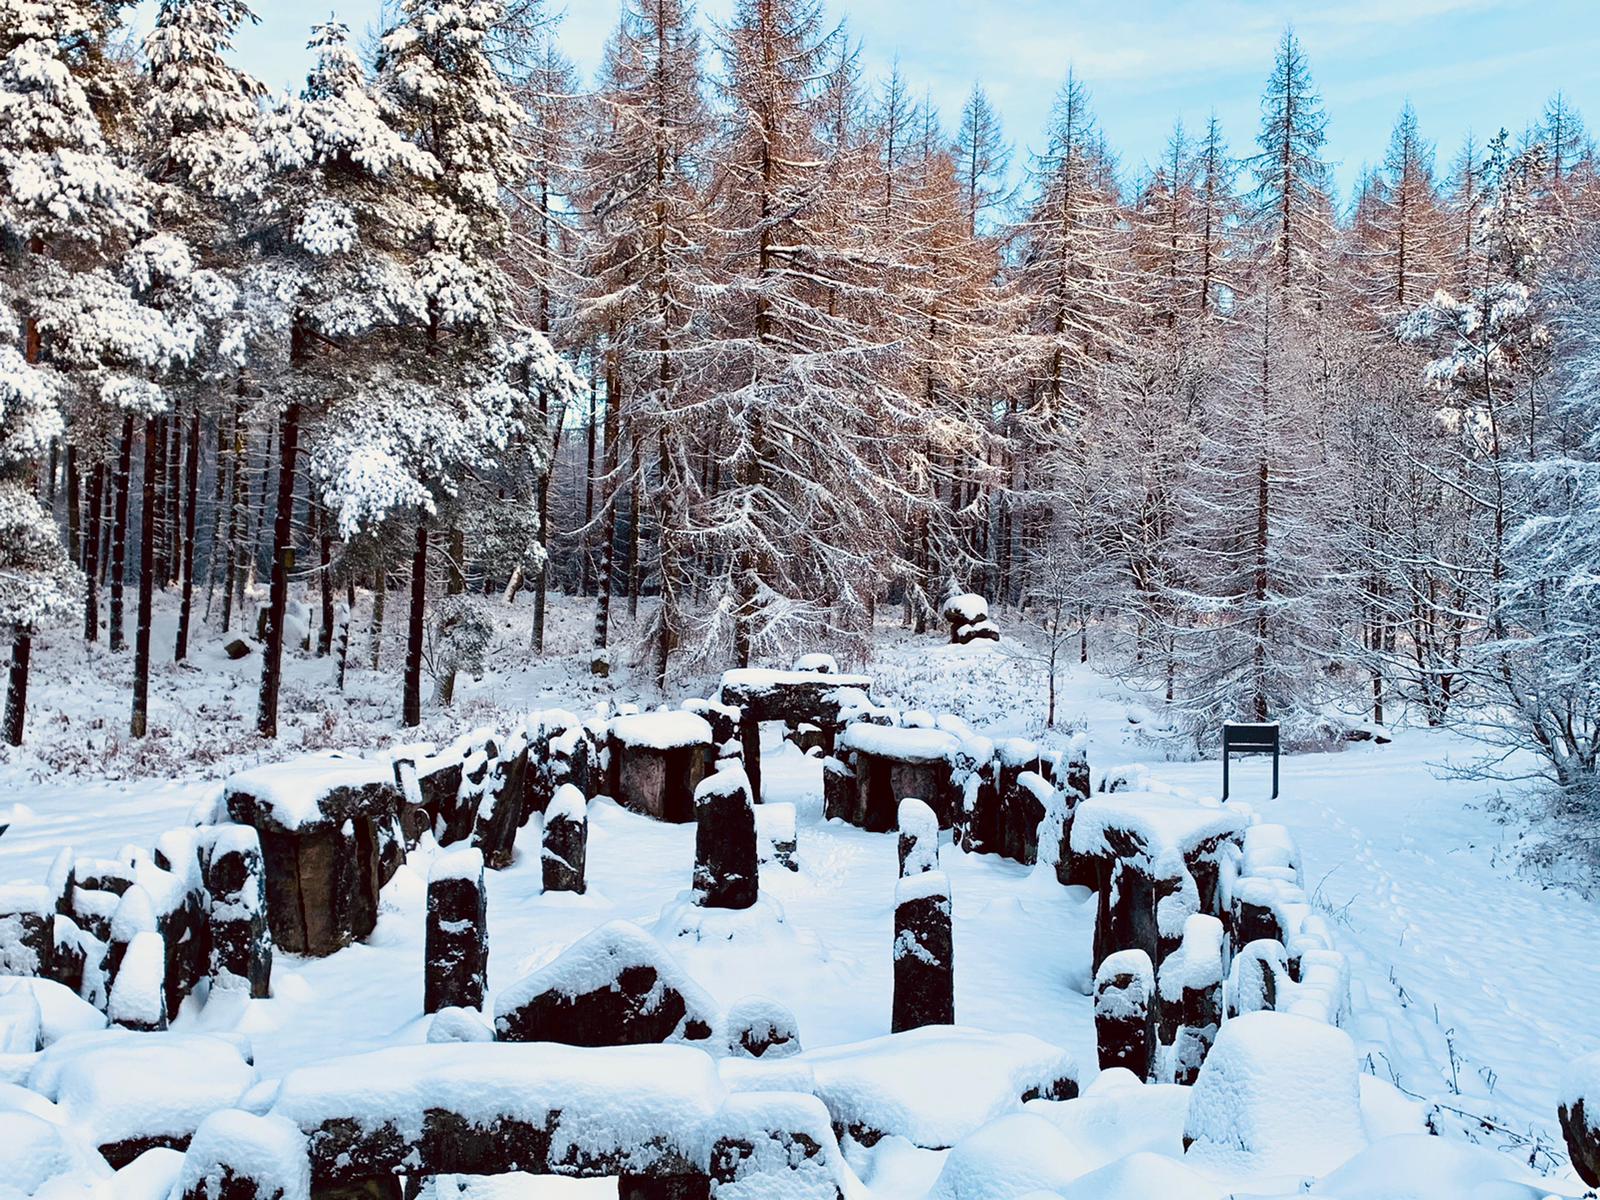 The Druid's Temple at Swinton Bivouac covered in snow